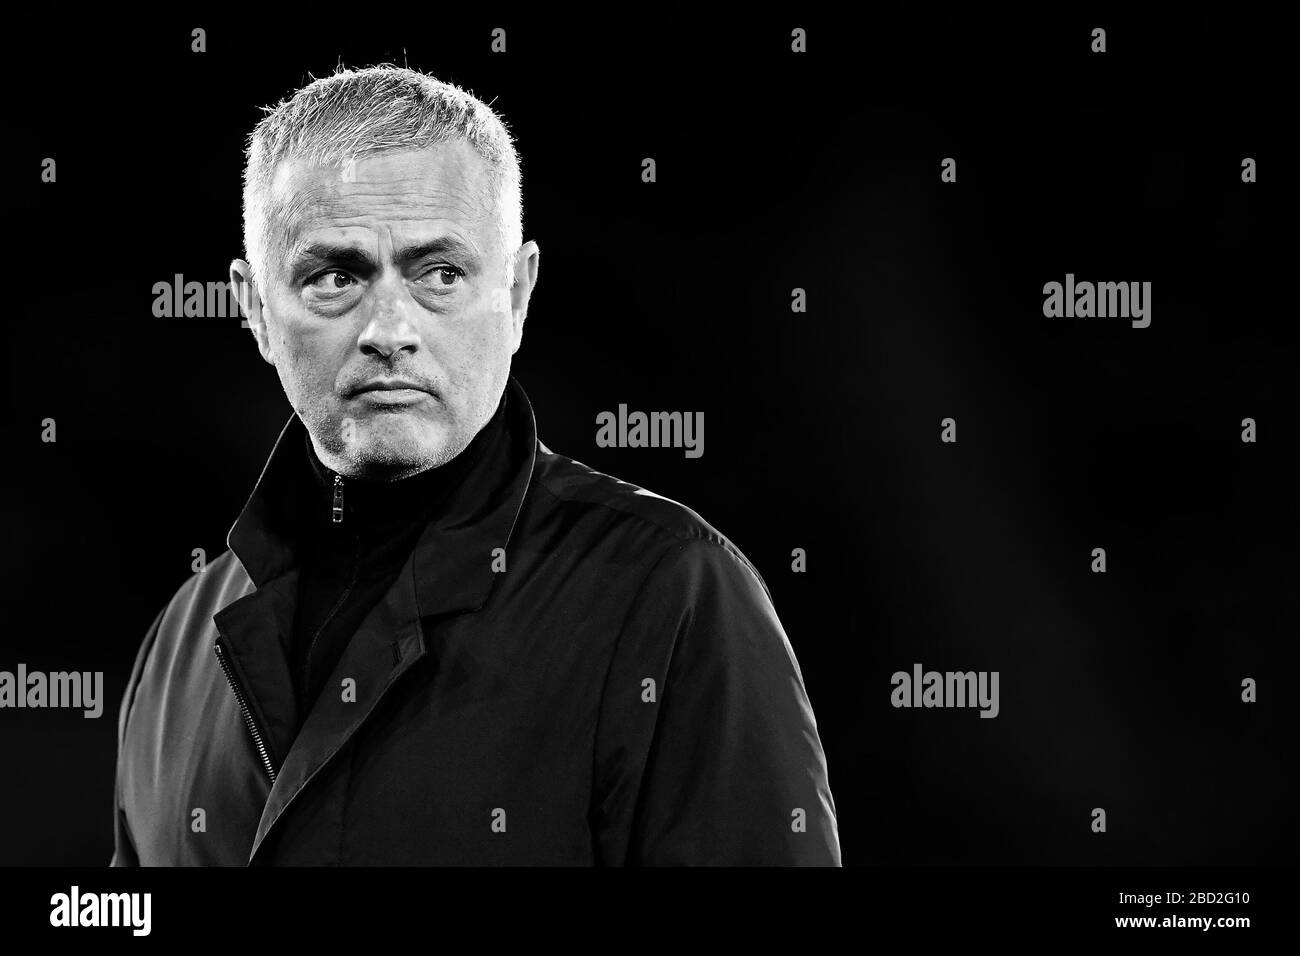 Manager of Manchester United, Jose Mourinho - Southampton v Manchester United, Premier League, St Mary's Stadium, Southampton - 1st December 2018  Editorial Use Only - DataCo restrictions apply Stock Photo